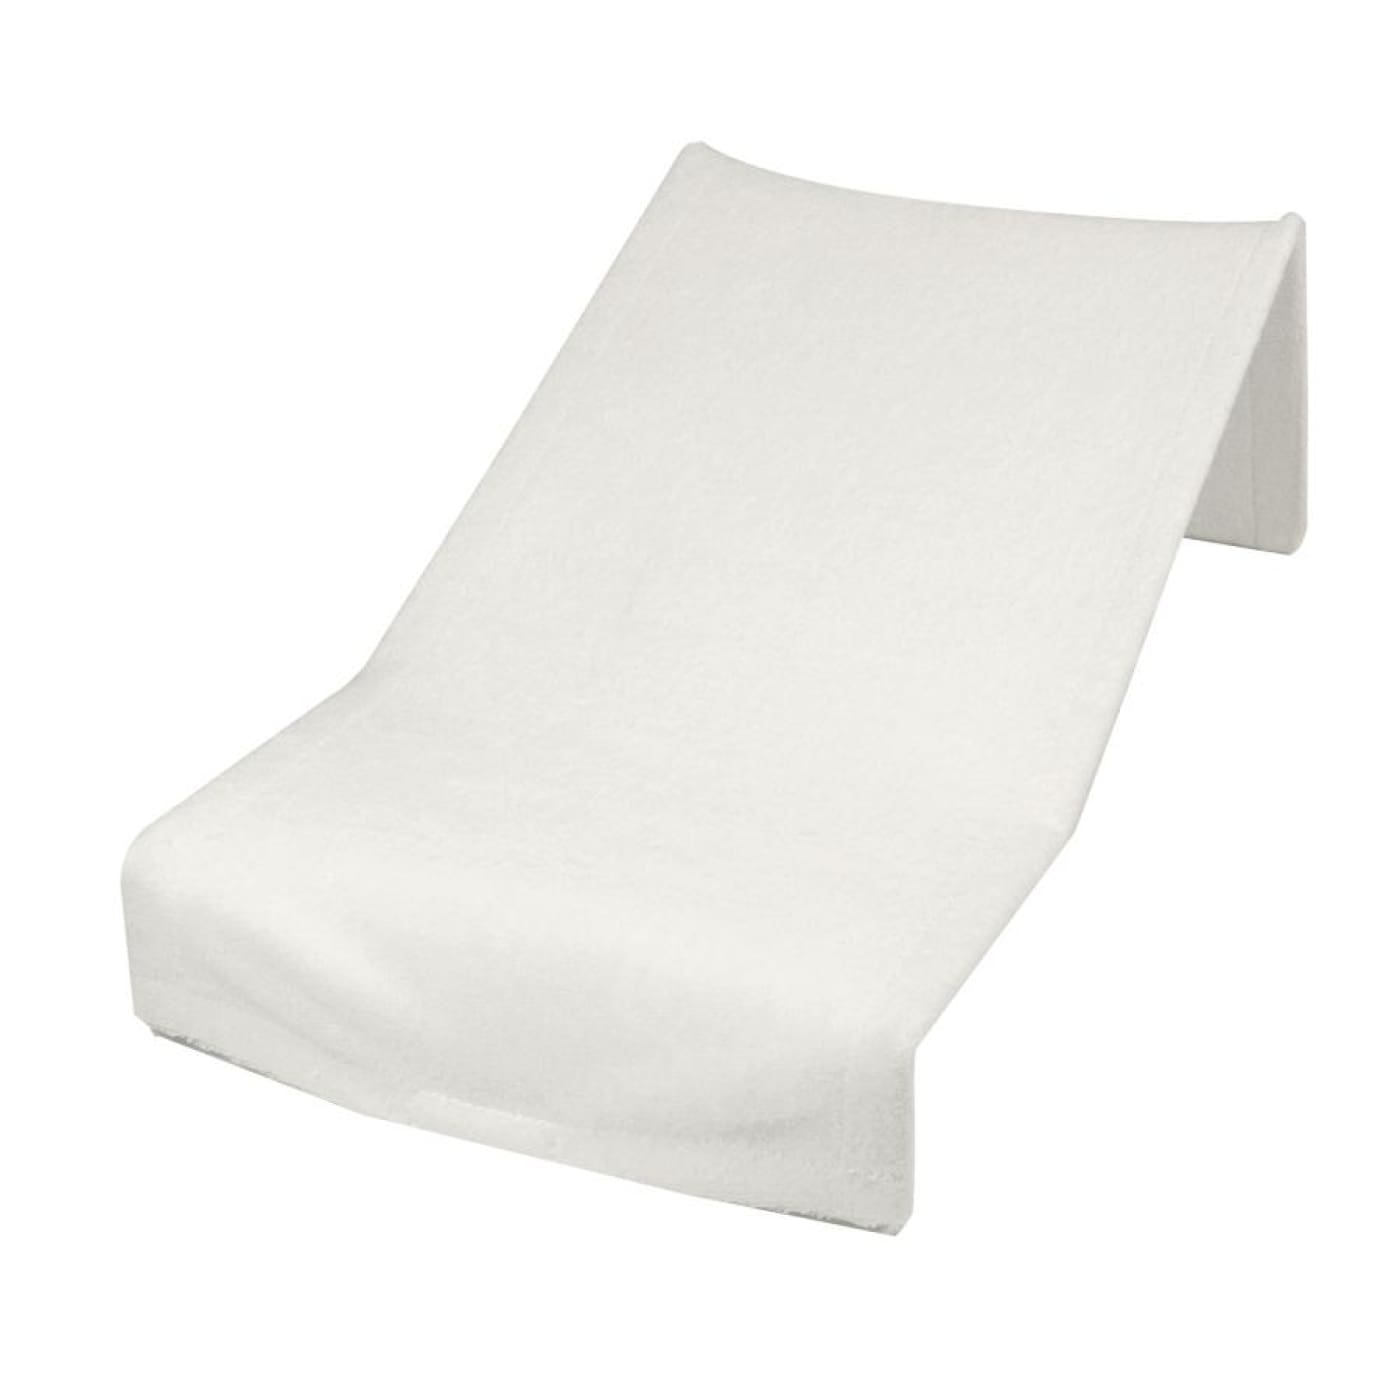 Babyhood Bath Support Towelling - White - BATHTIME & CHANGING - BATH SUPPORTS/SEATS